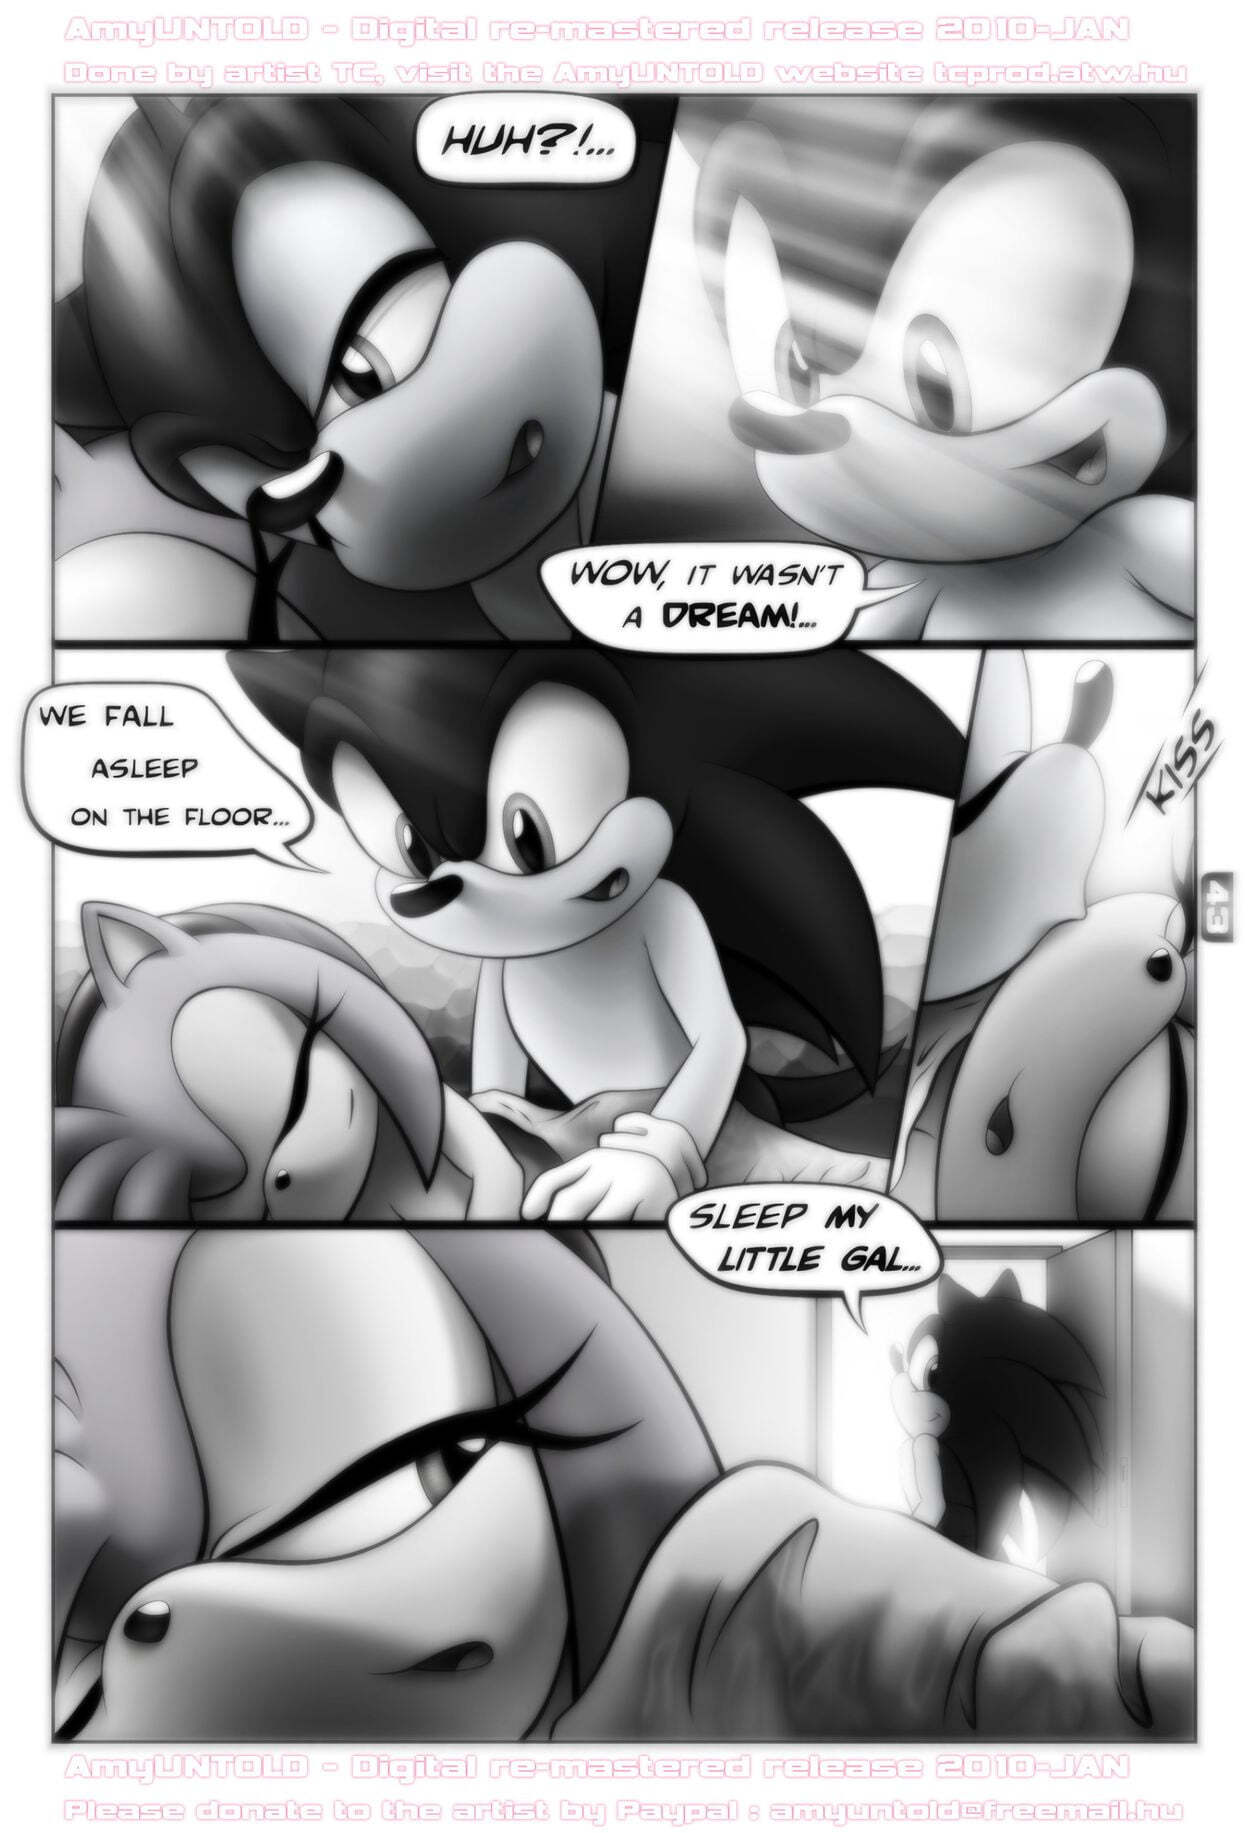 Amy Untold - Finally - Page 43